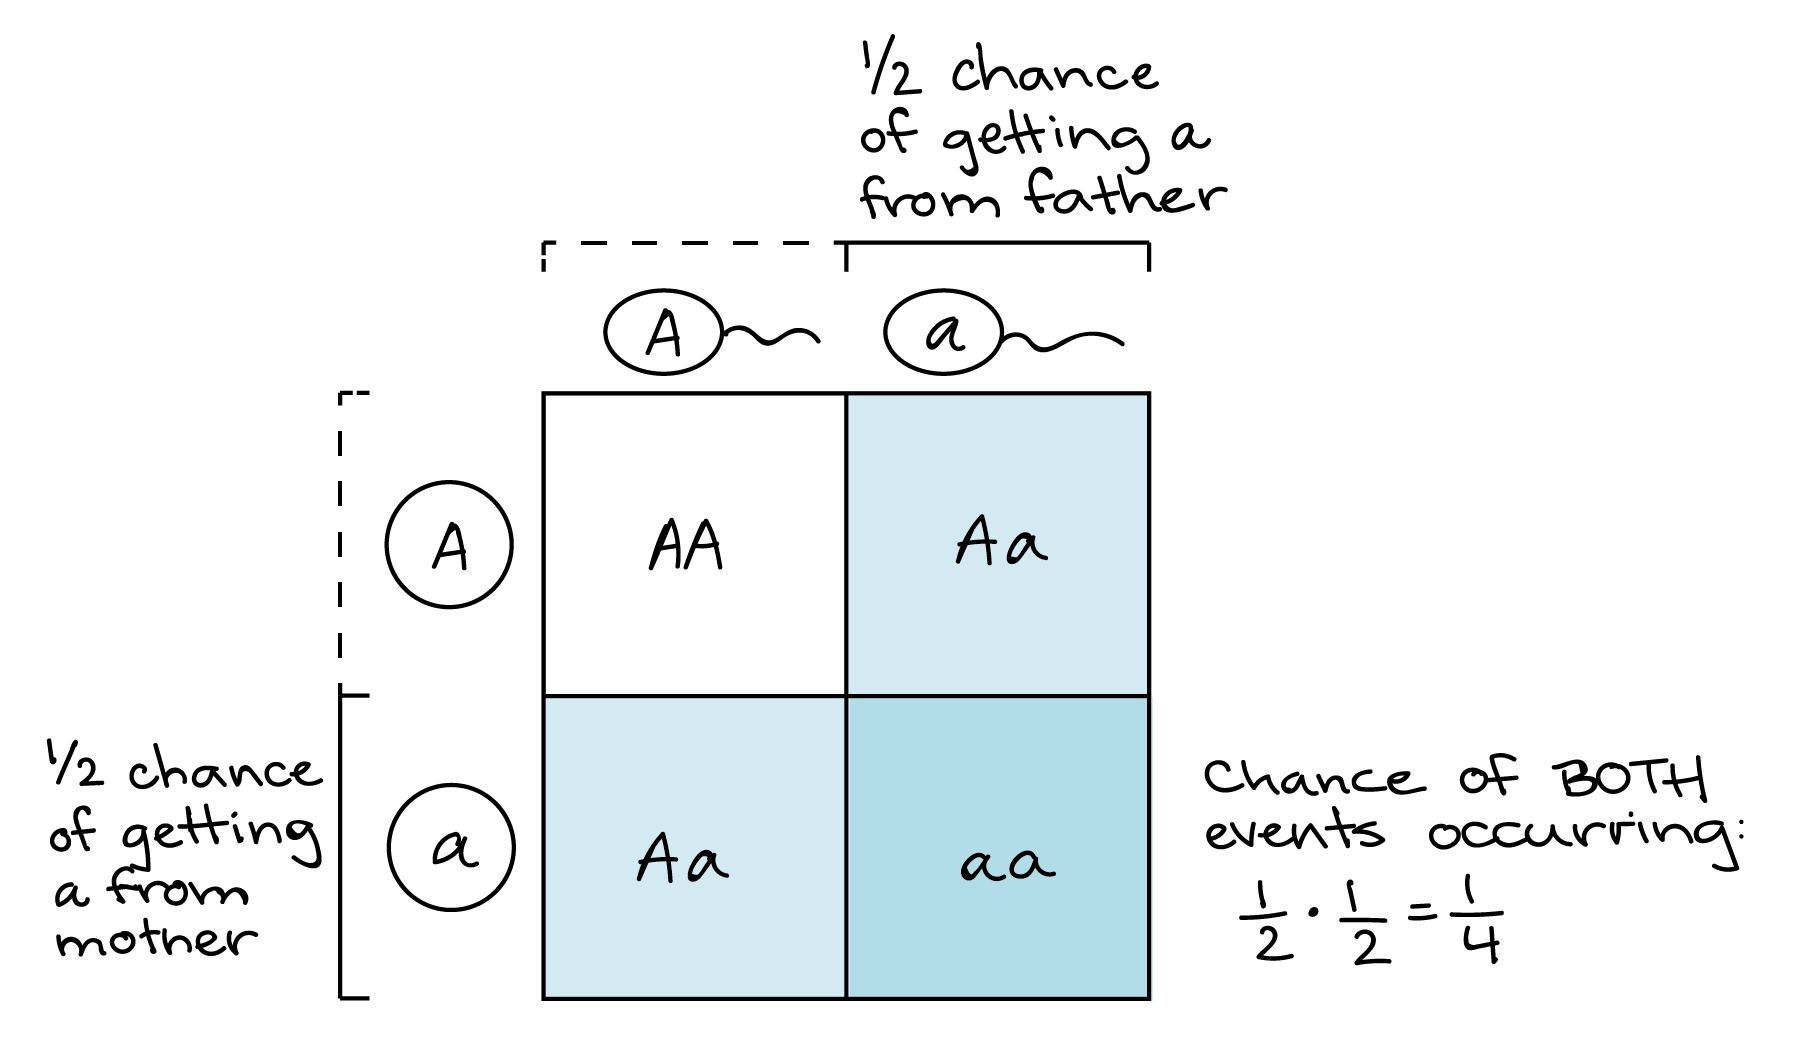 Illustration of how a Punnett square can represent the product rule. Punnett square:||A|a-|-|-|-A||AA|**Aa**a||_Aa_|***aa*** There's a 1/2 chance of getting an a allele from the male parent, corresponding to the rightmost column of the Punnett square. Similarly, there's a 1/2 chance of getting an a allele from the maternal parent, corresponding to the bottommost row of the Punnett square. The intersect of these the row and column, corresponding to the bottom right box of the table, represents the probability of getting an a allele from the maternal parent and the paternal parent (1 out of 4 boxes in the Punnett square, or a 1/4 chance).